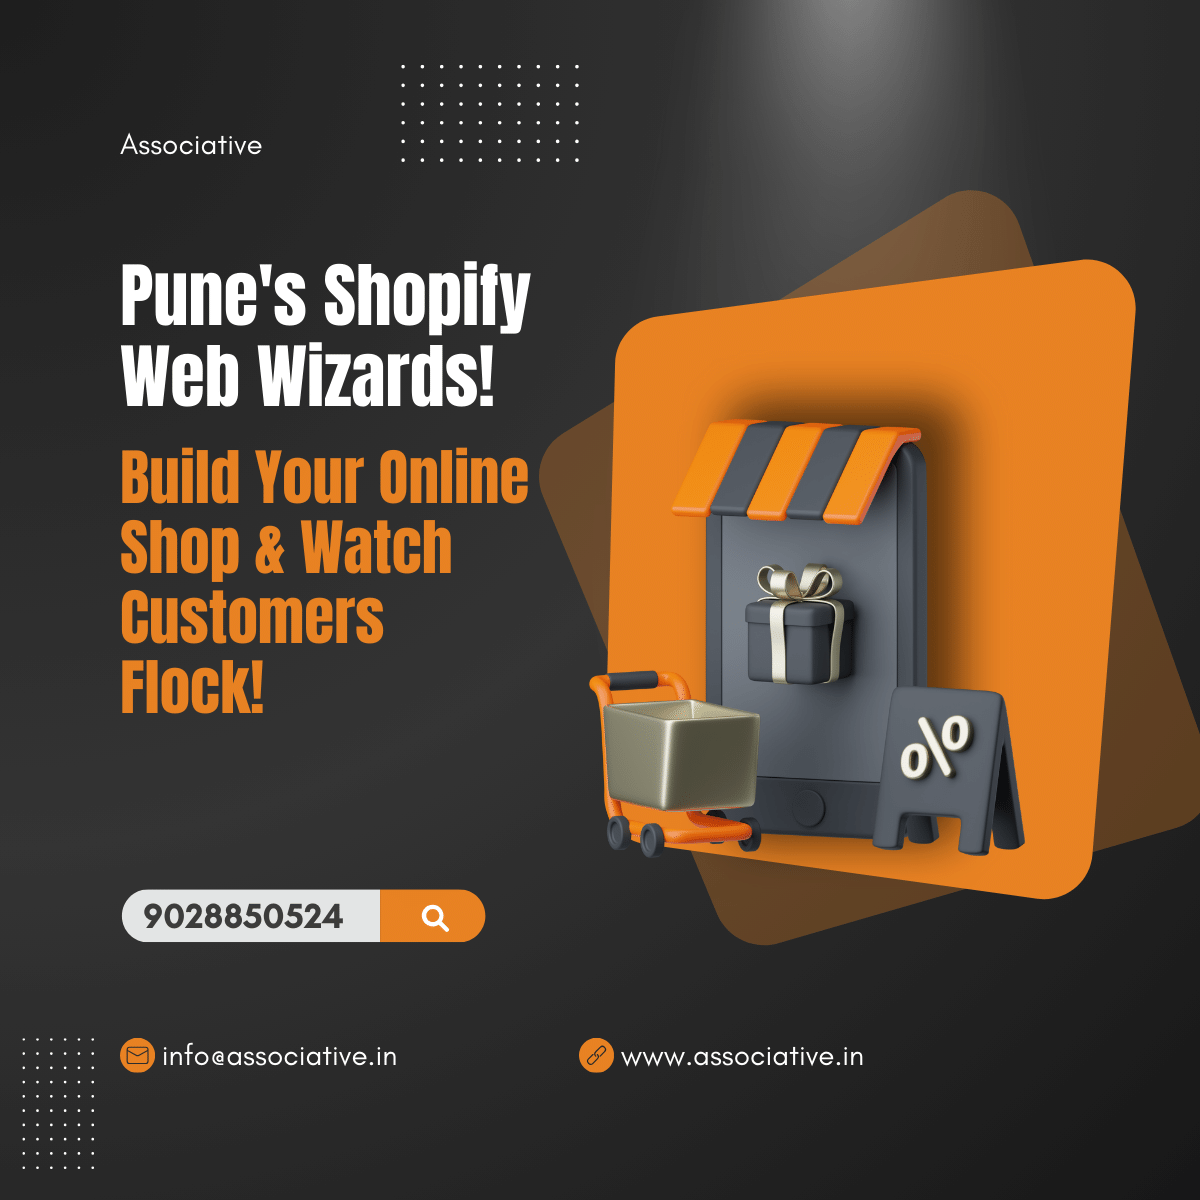 Pune's Shopify Web Wizards! Build Your Online Shop & Watch Customers Flock!